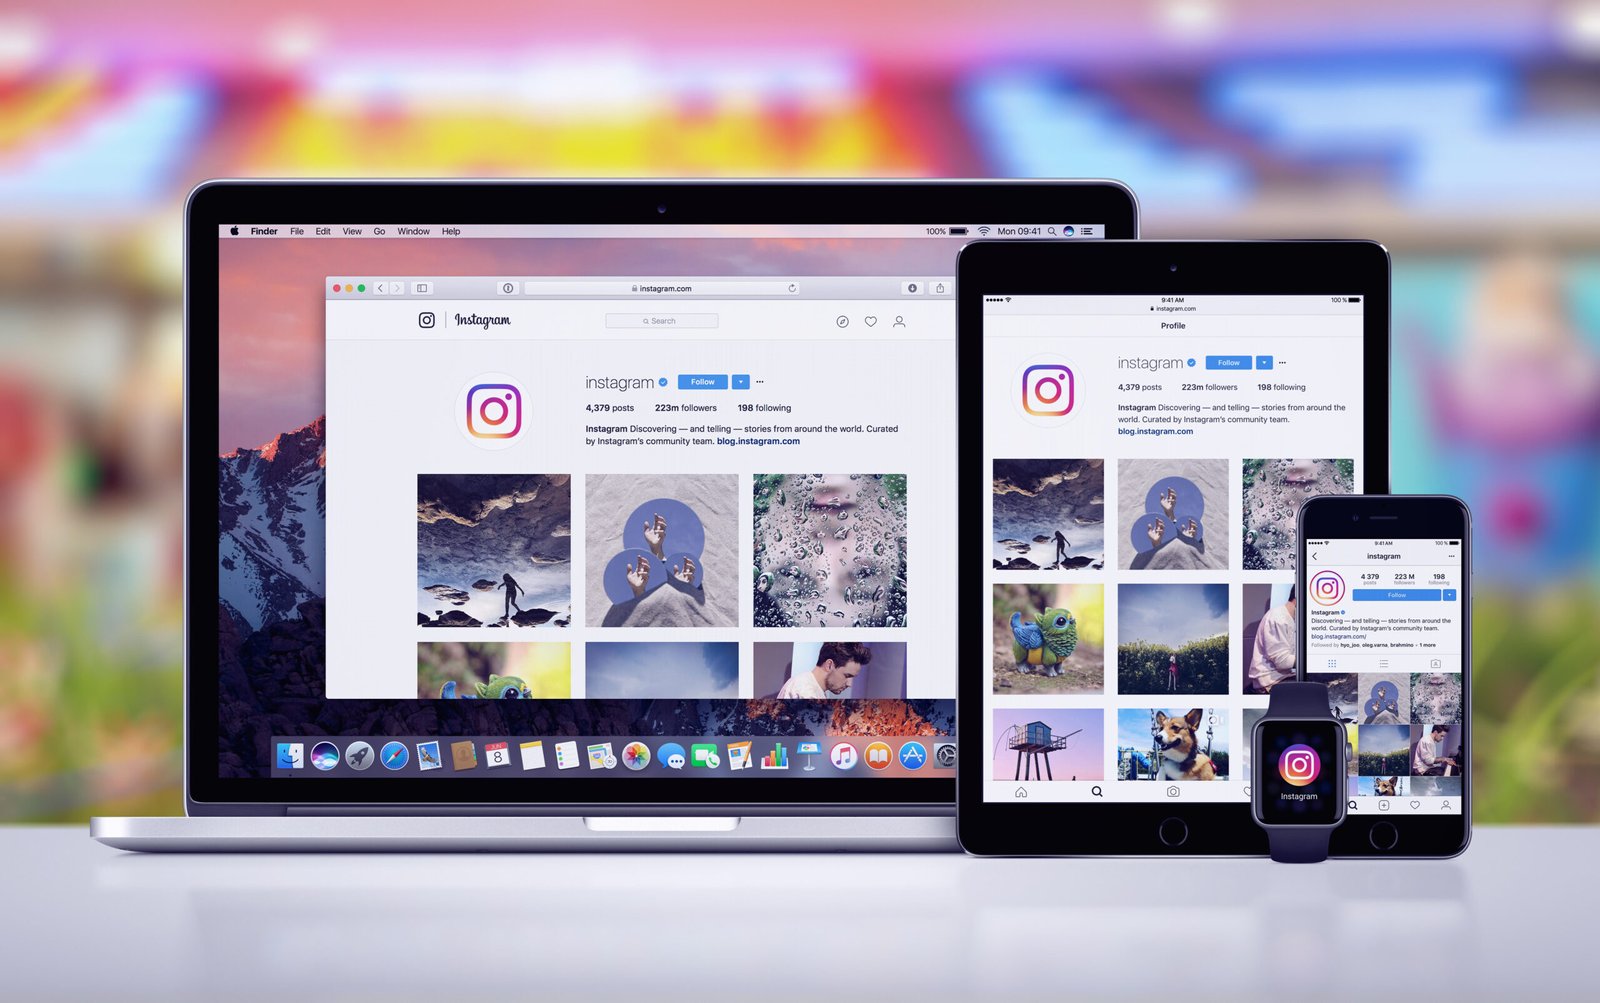 Instagram Flags AI-Generated Content – Source: www.darkreading.com